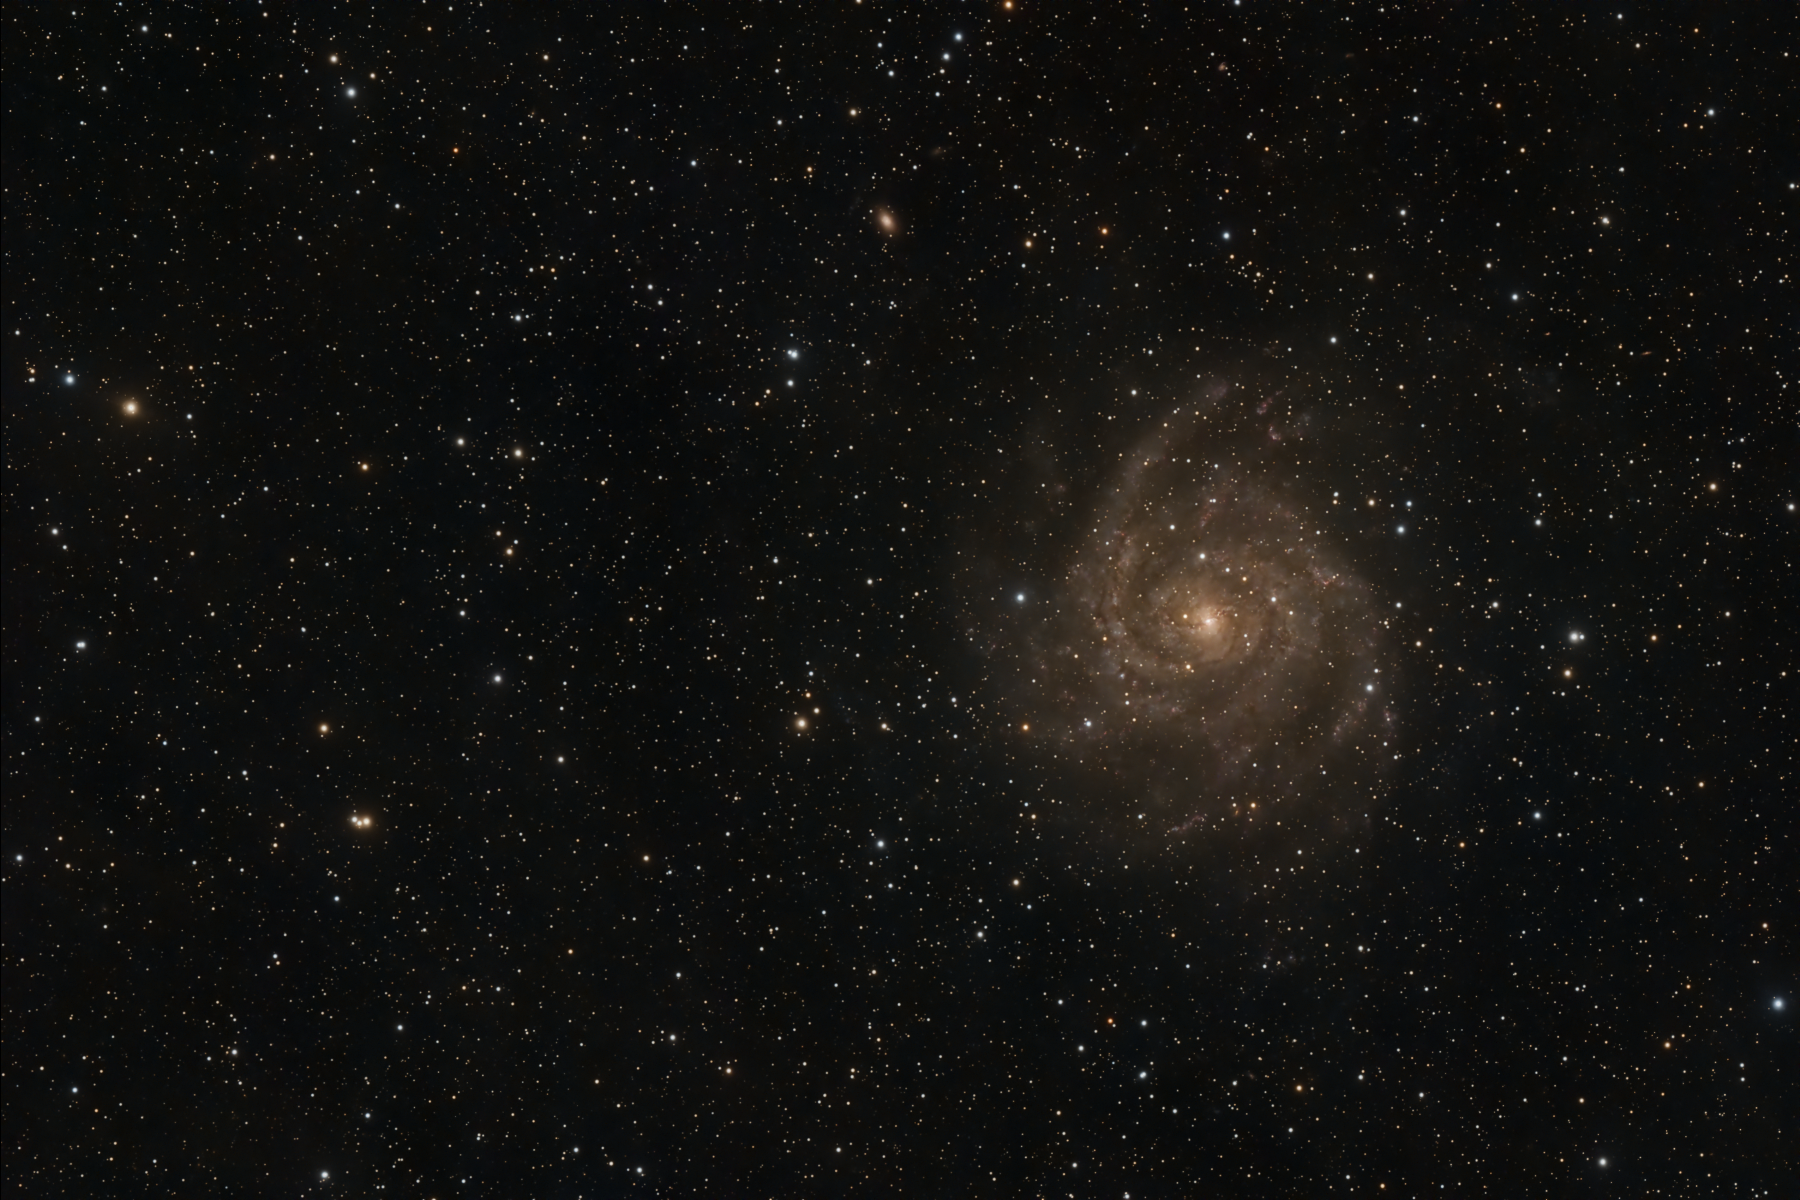 IC 342 in Camelopardalis, The Hidden Galaxy